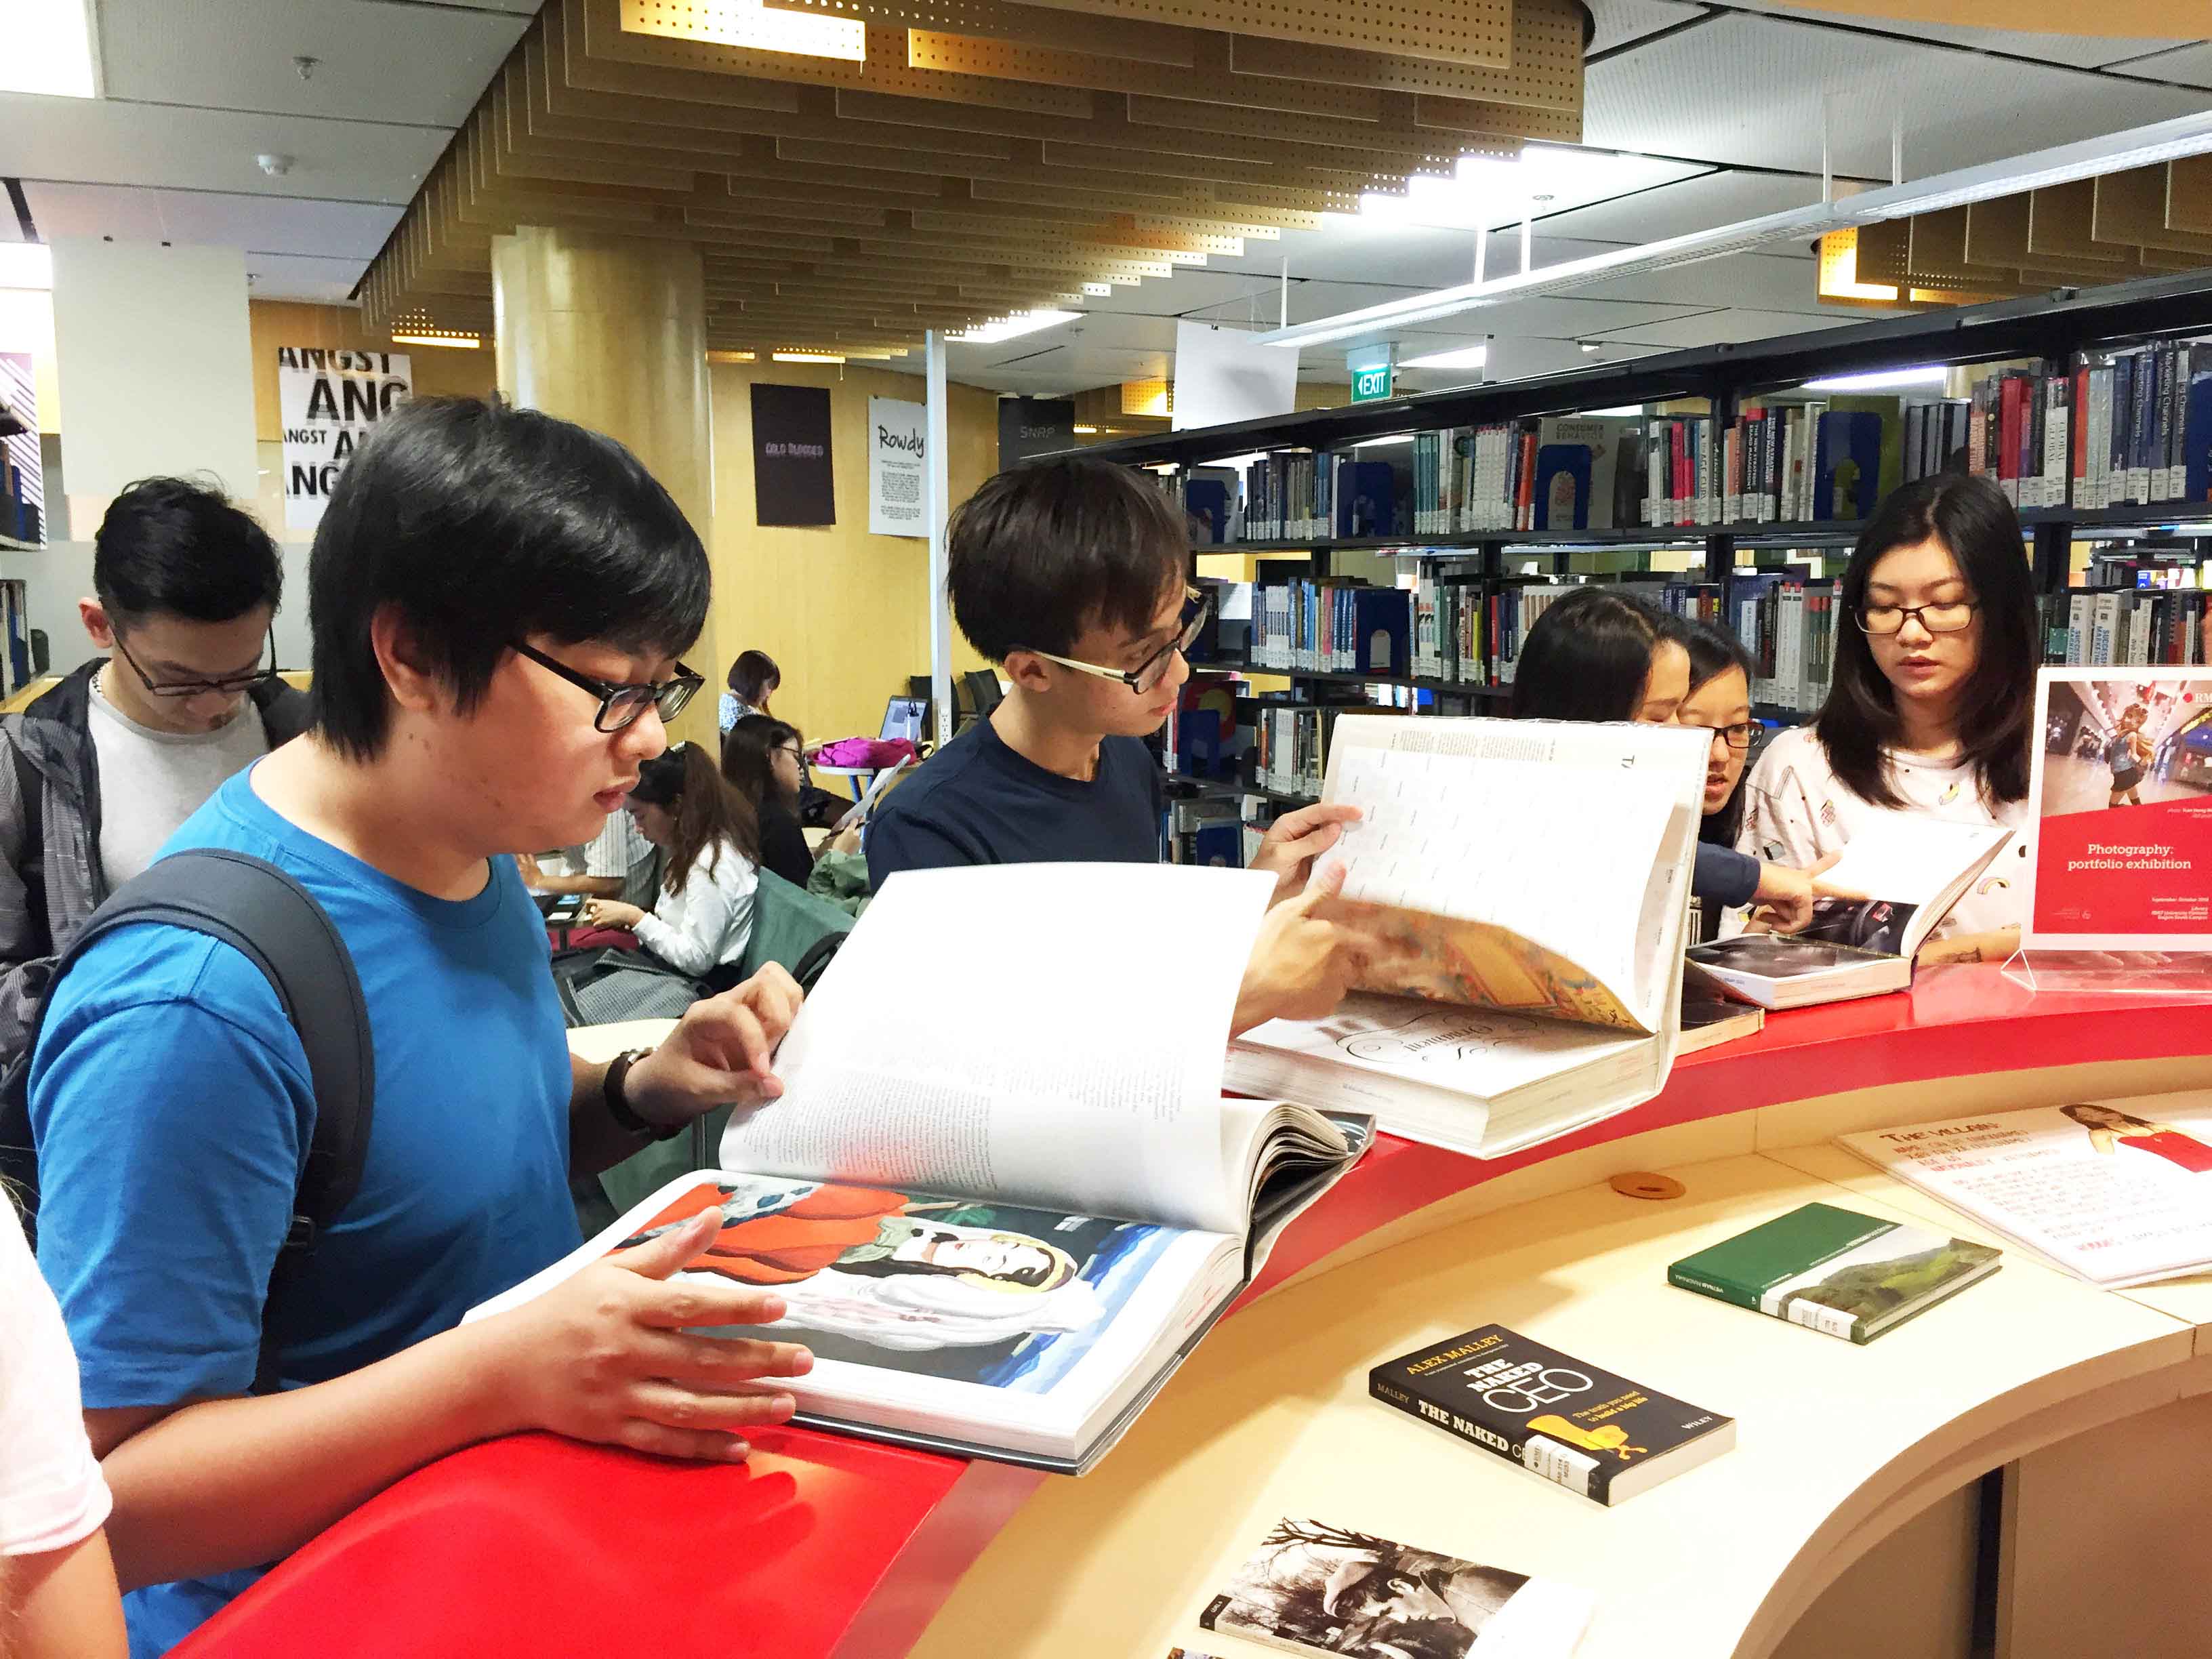 Students look through books at the RMIT Library.